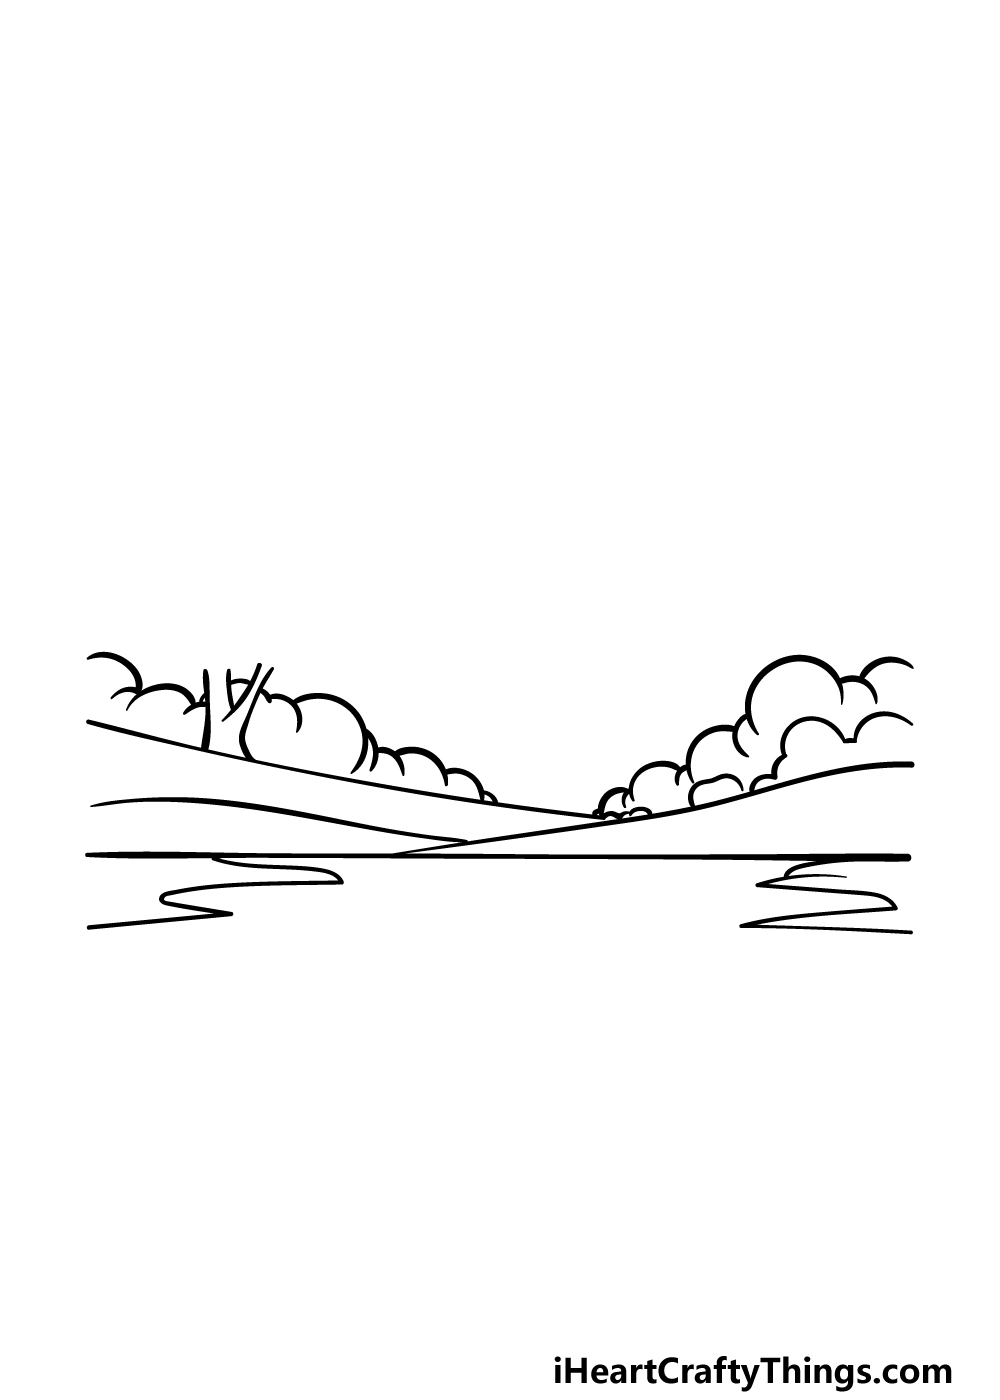 how to draw a Simple Landscape step 3